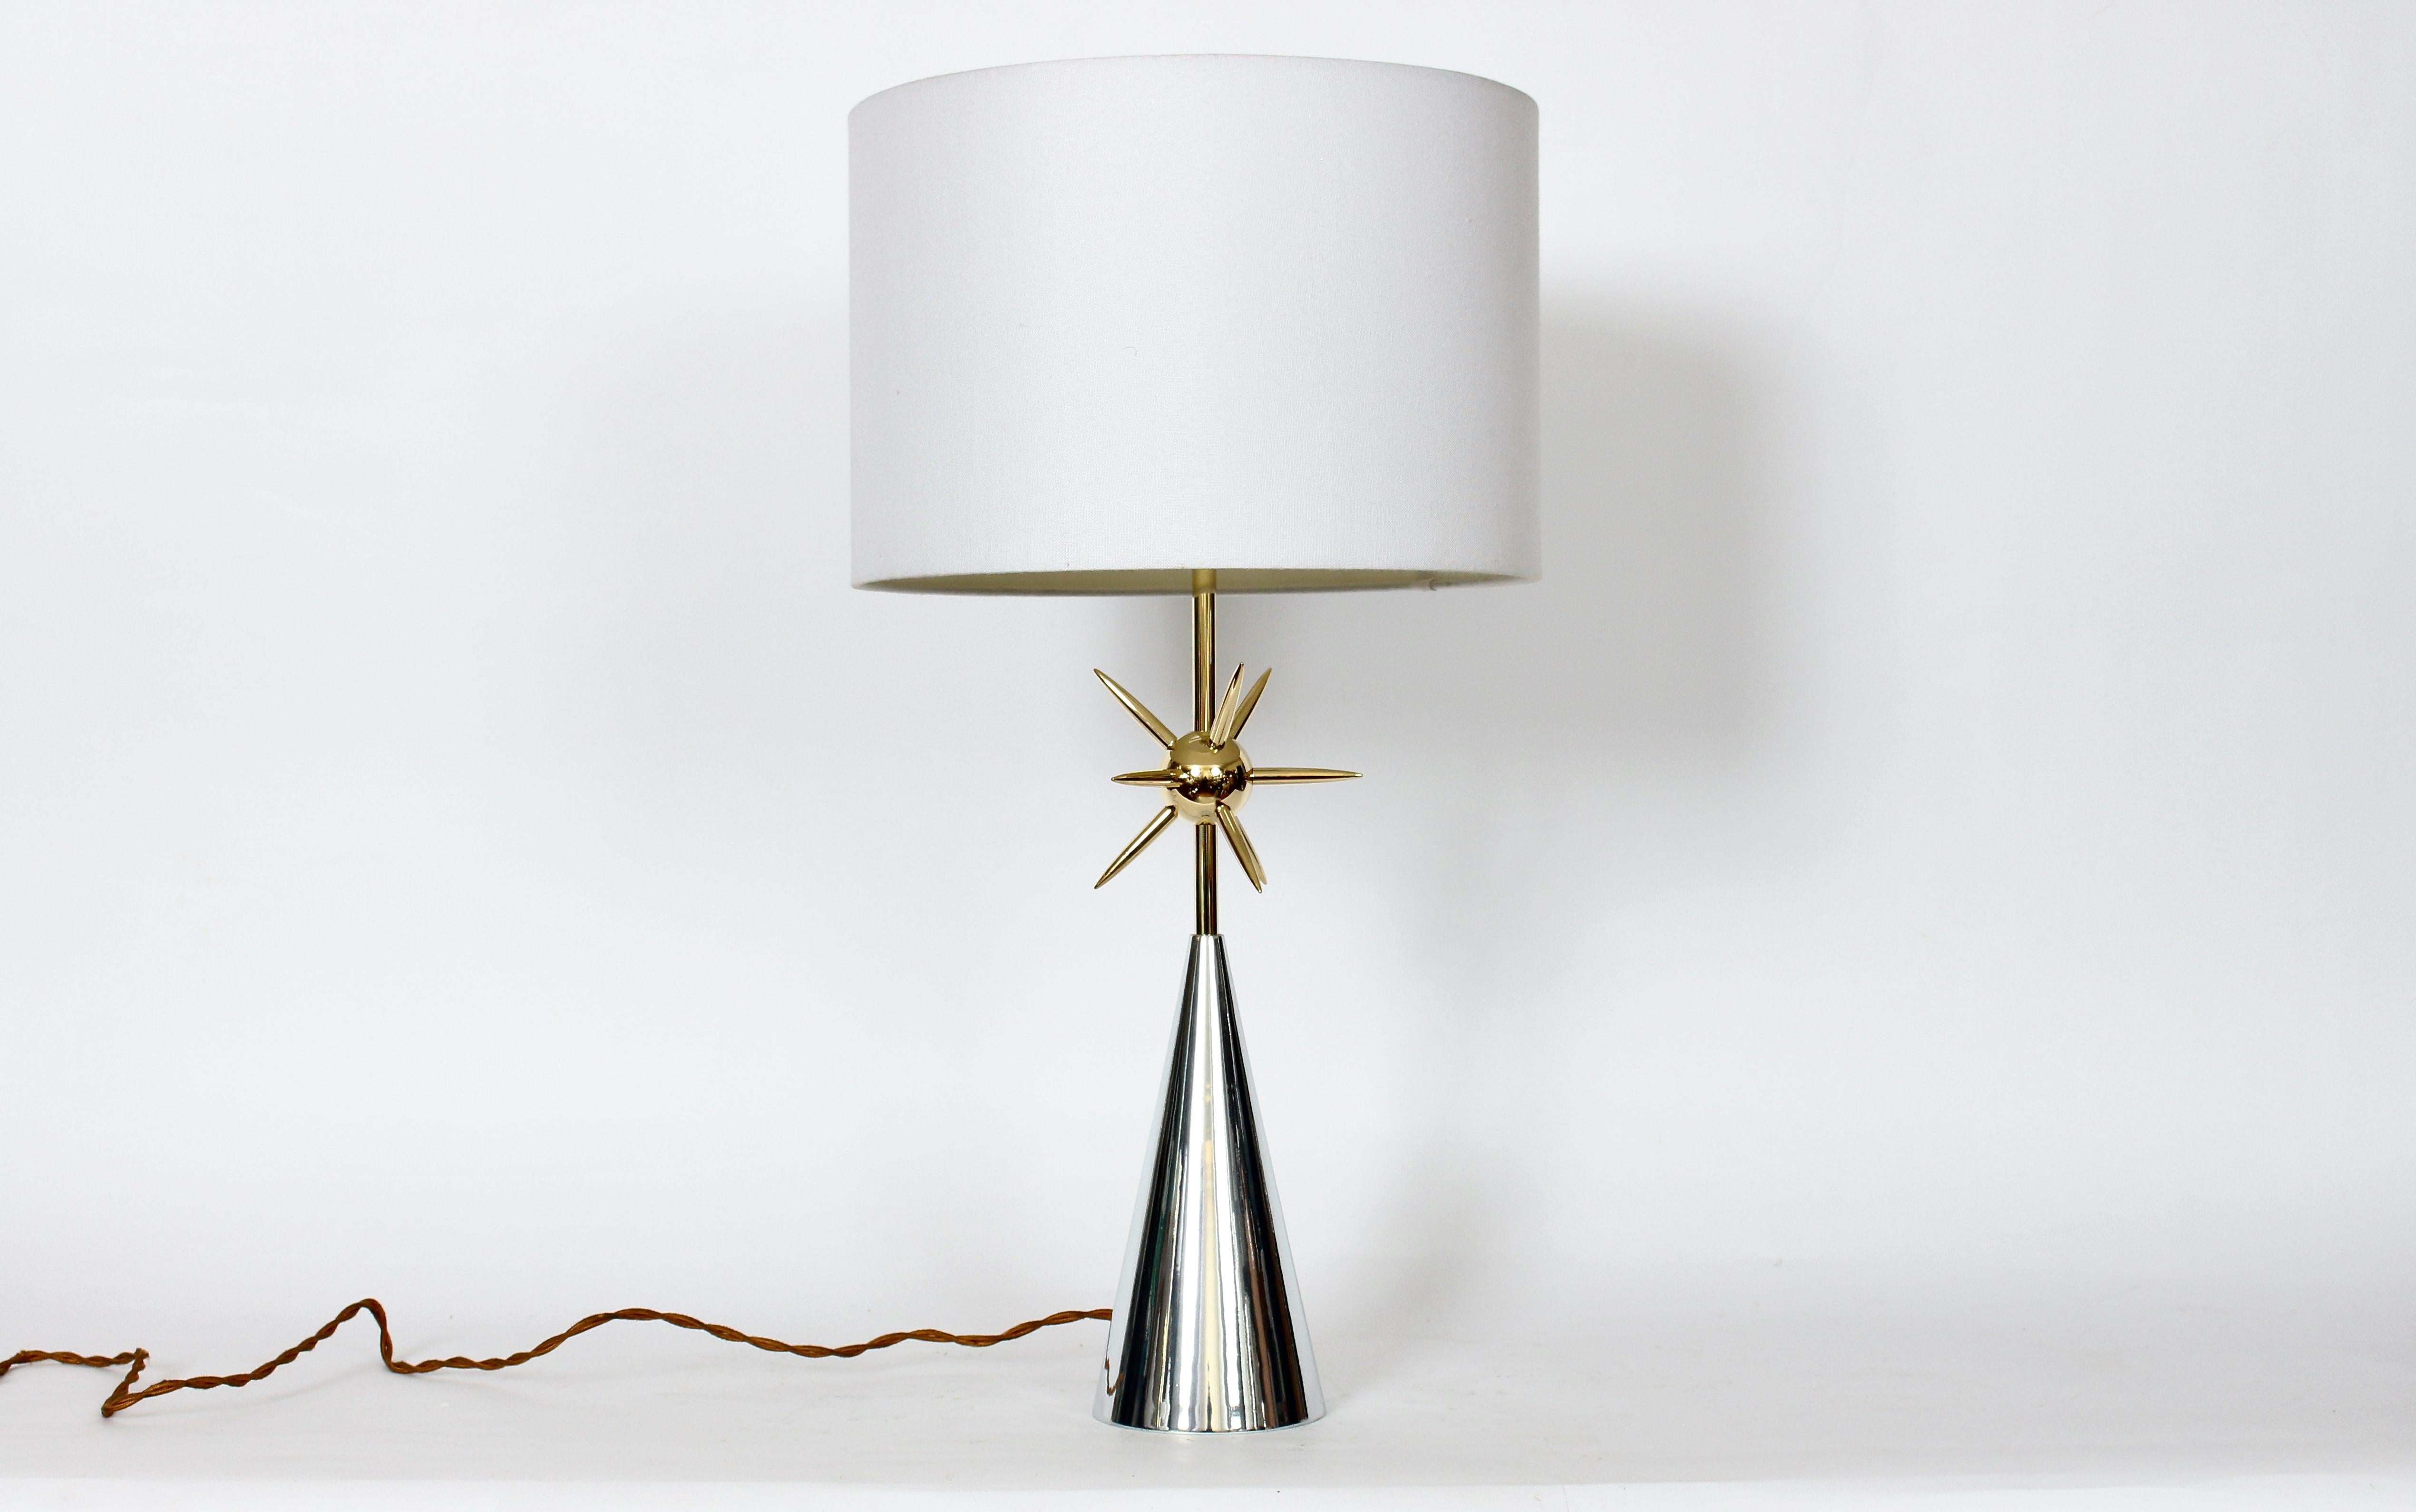 Original Mutual Sunset Lamp Co. attributed Atomic Sputnik Polished Mixed Metal Table Lamp. In the manner of Tommi Parzinger. Hollywood Regency style. Featuring a sturdy, repolished, reflective Aluminum (5D) conical base, detailed with a bright Brass